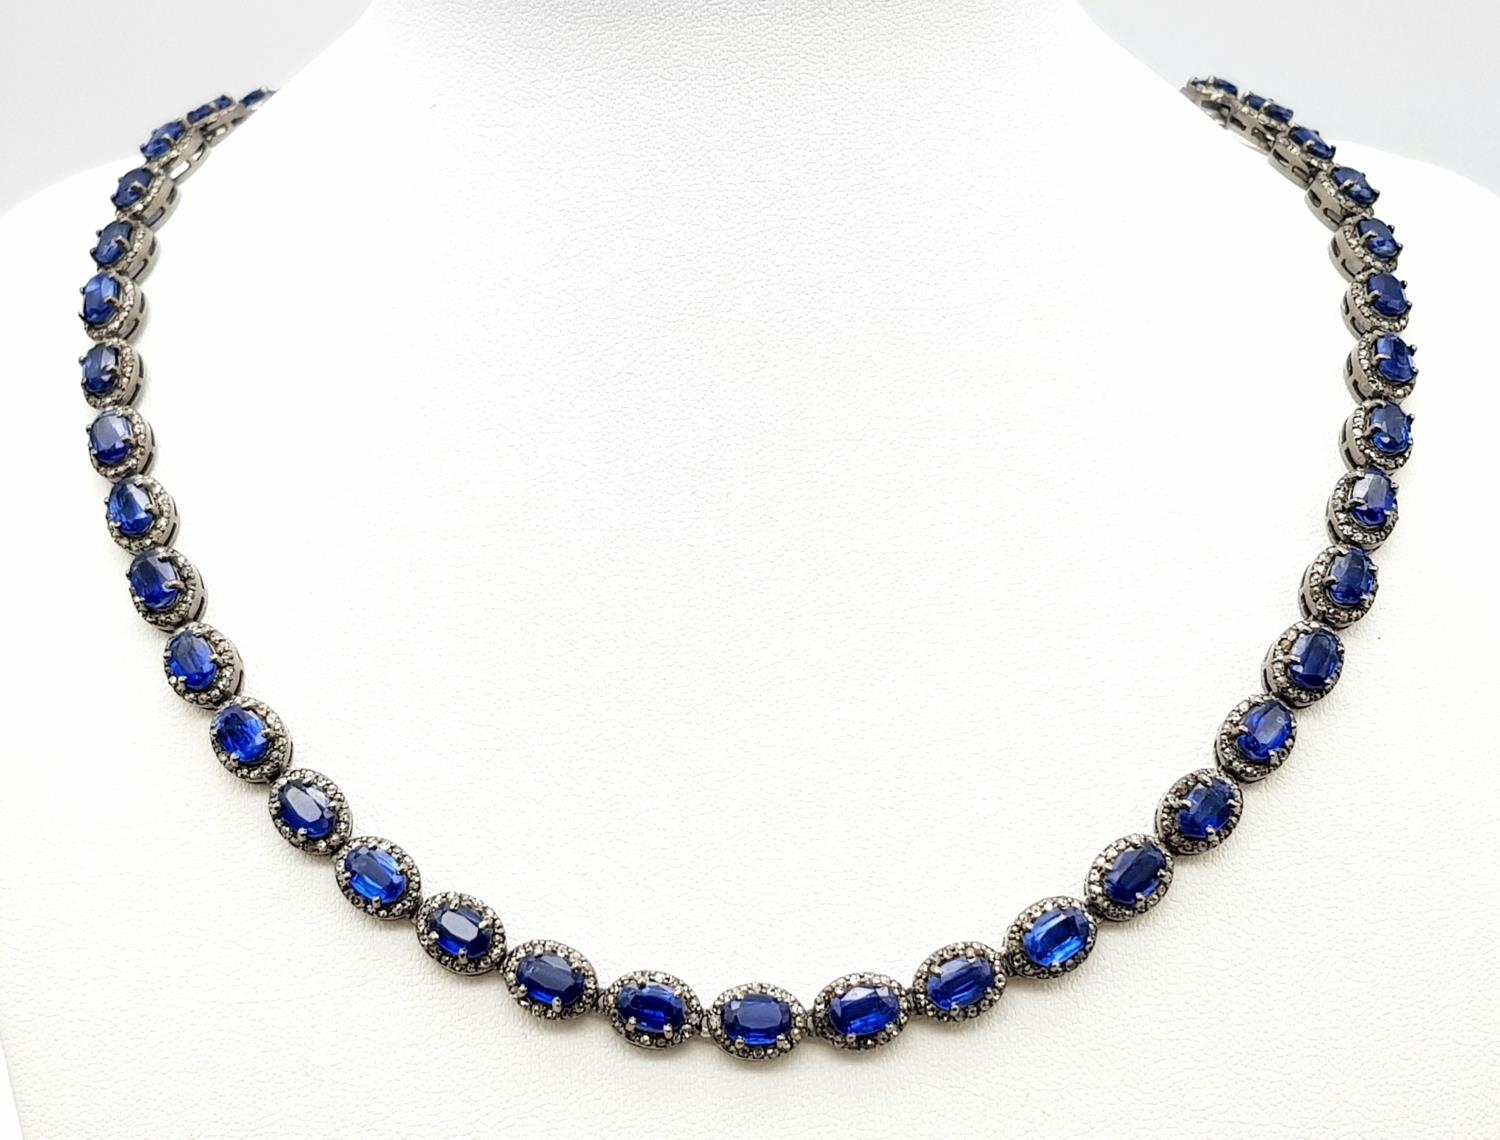 A 25ctw Kyanite Gemstone Tennis Necklace with Diamond Accents. 4ctw of old cut diamonds. Set in